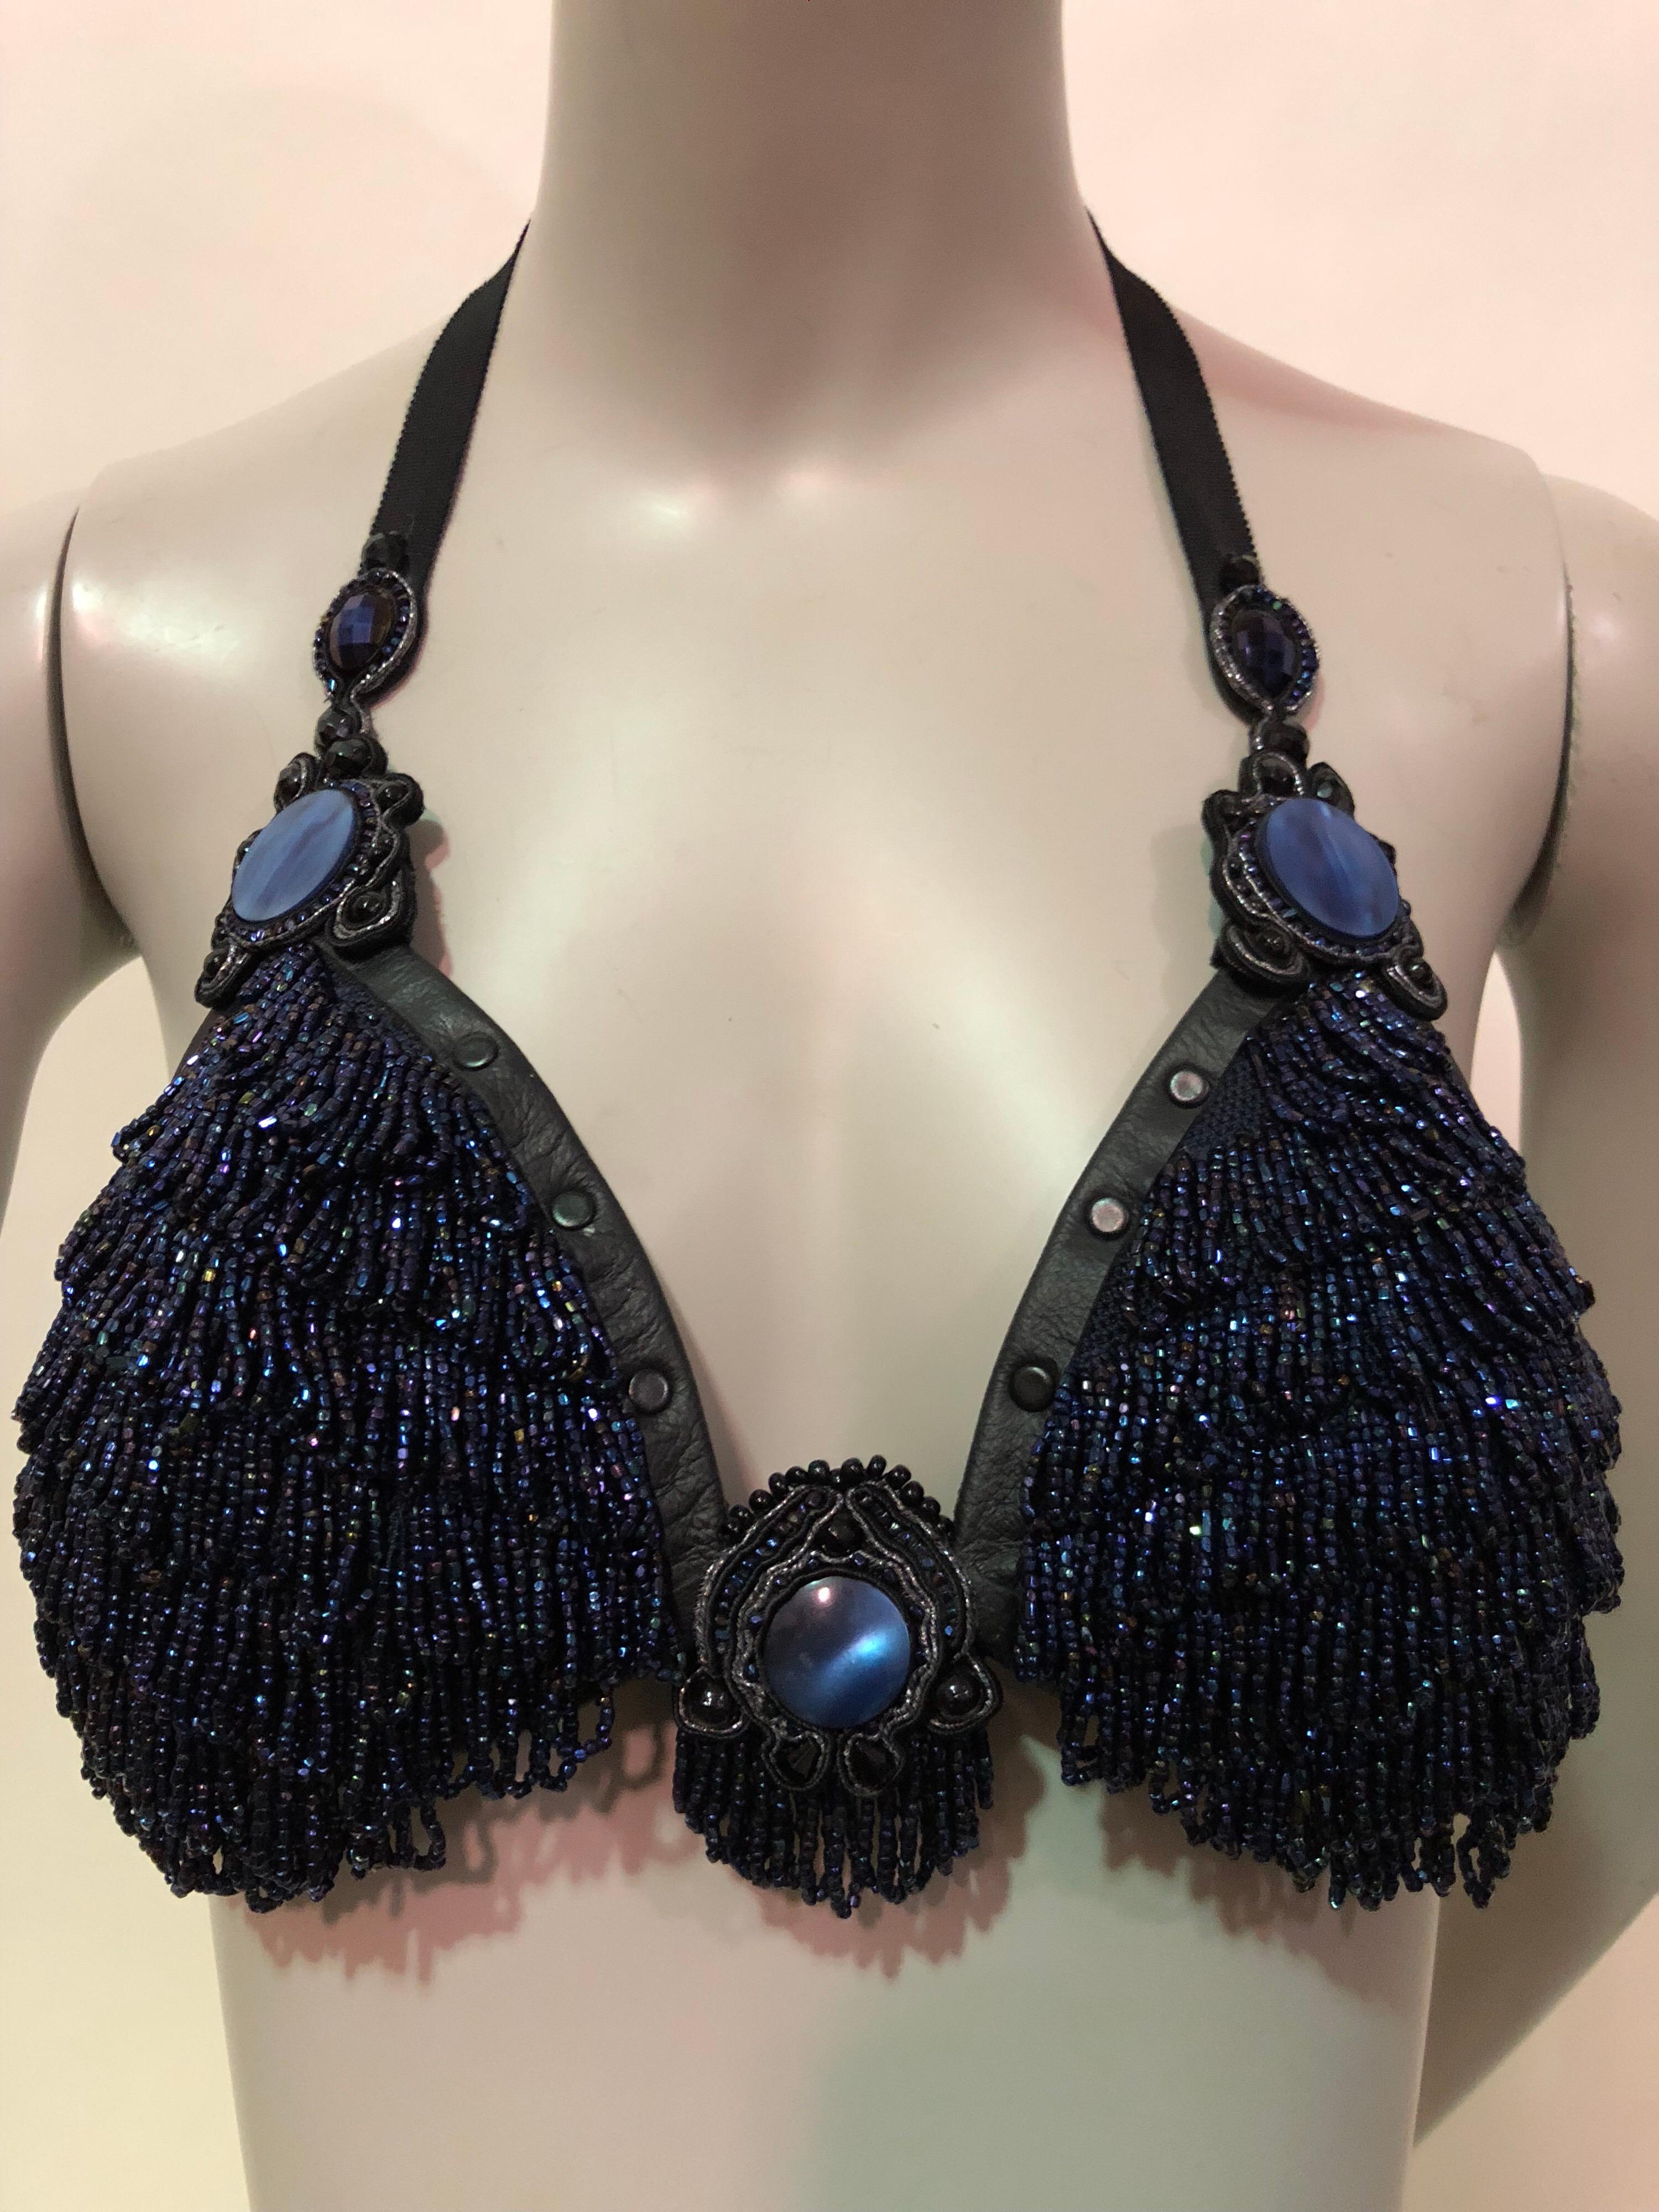 Artisinal Made Blue Fringe Beaded Bralette With Leather Trim & Ribbon Tie Back In Excellent Condition For Sale In Gresham, OR